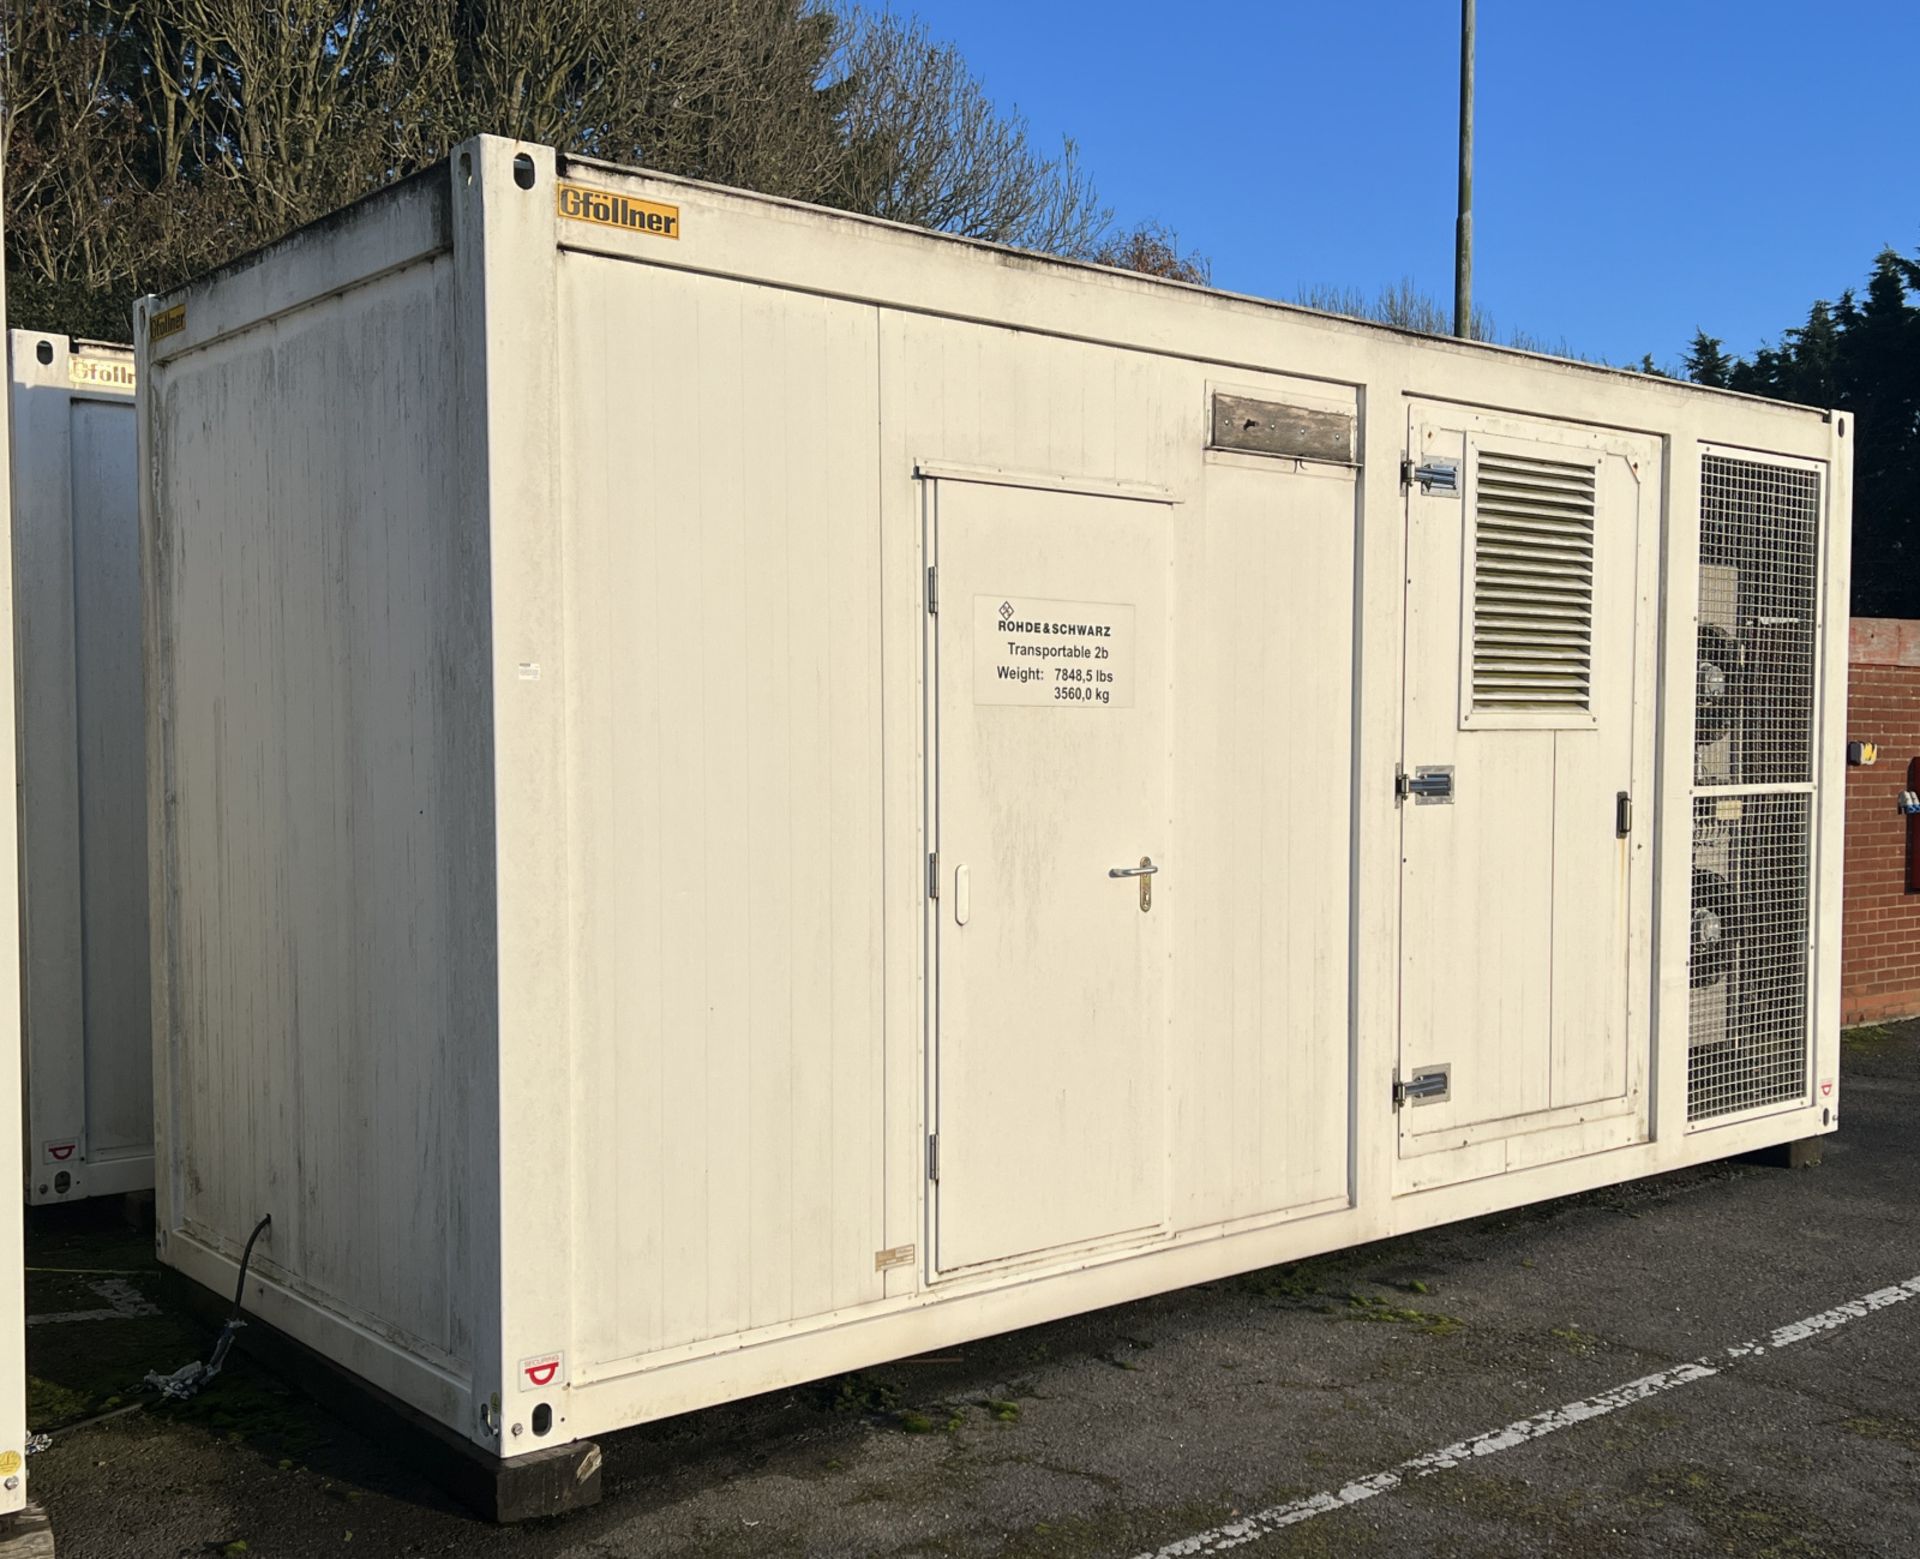 2x 20ft insulated ISO containers containing Rohde & Schwarz transmission equipment - see description